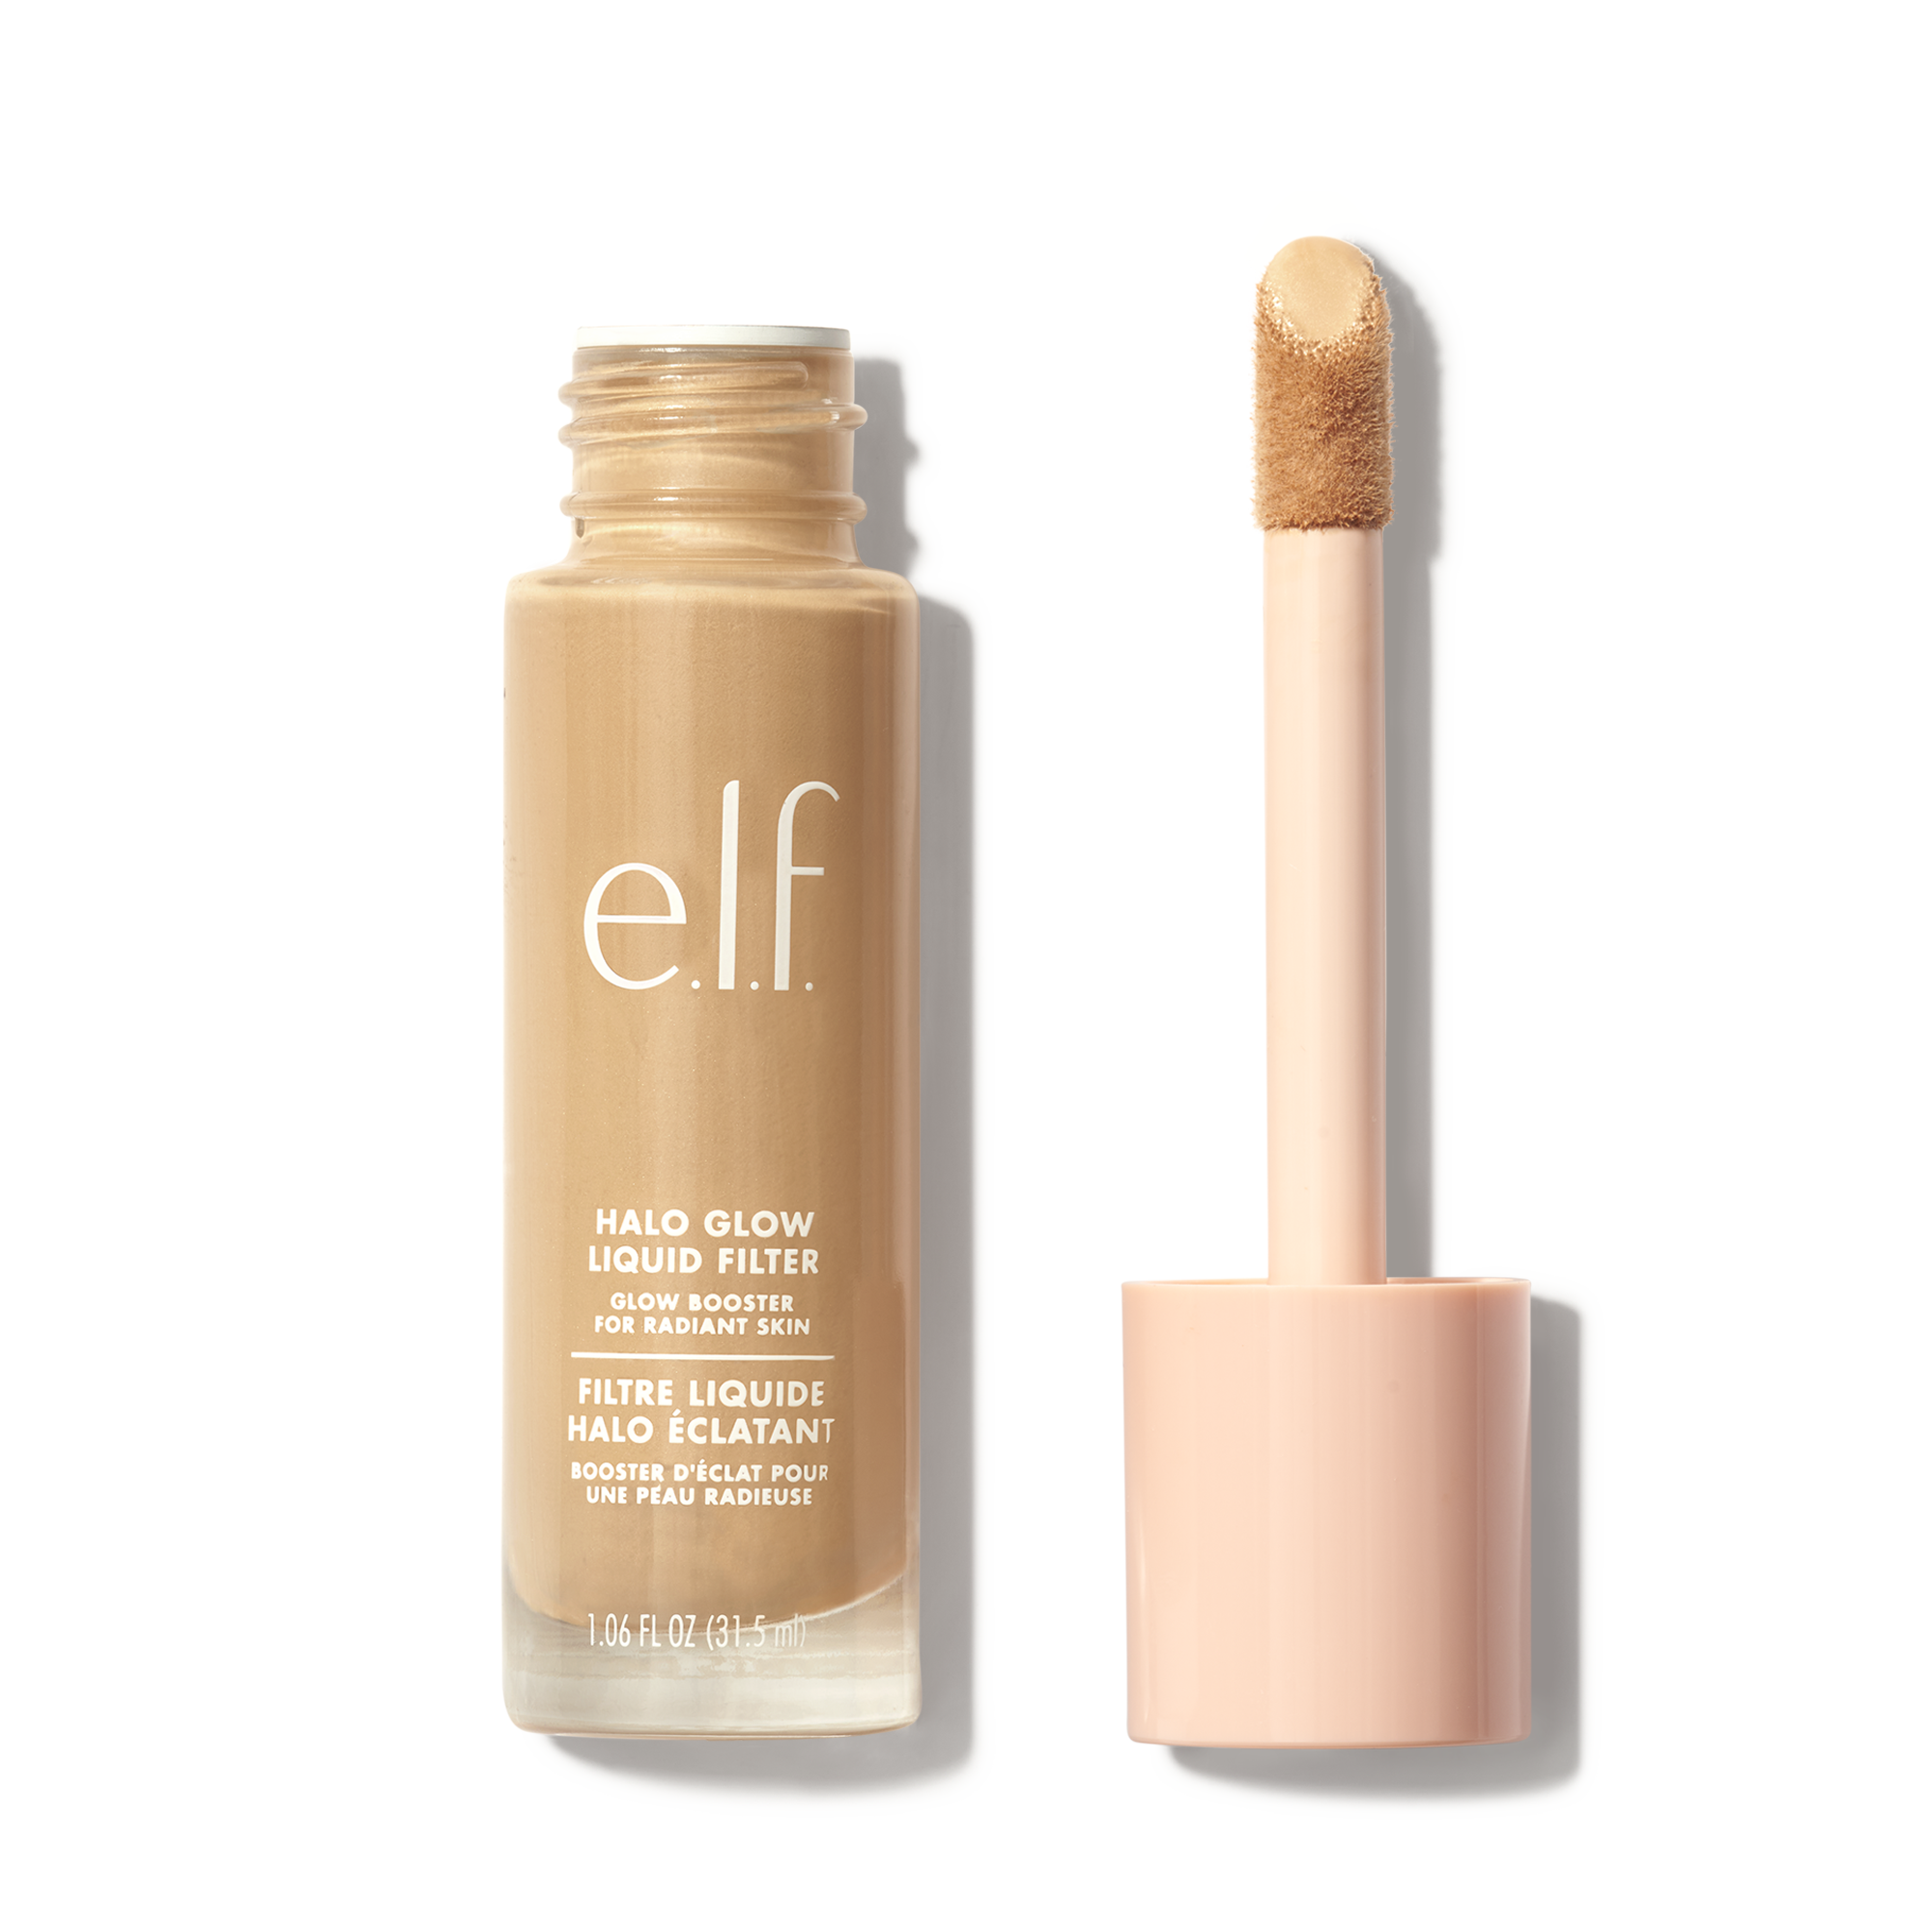 7 Holy Grail e.l.f. Cosmetics Products Your Makeup Bag Needs - Beauty Bay  Edited